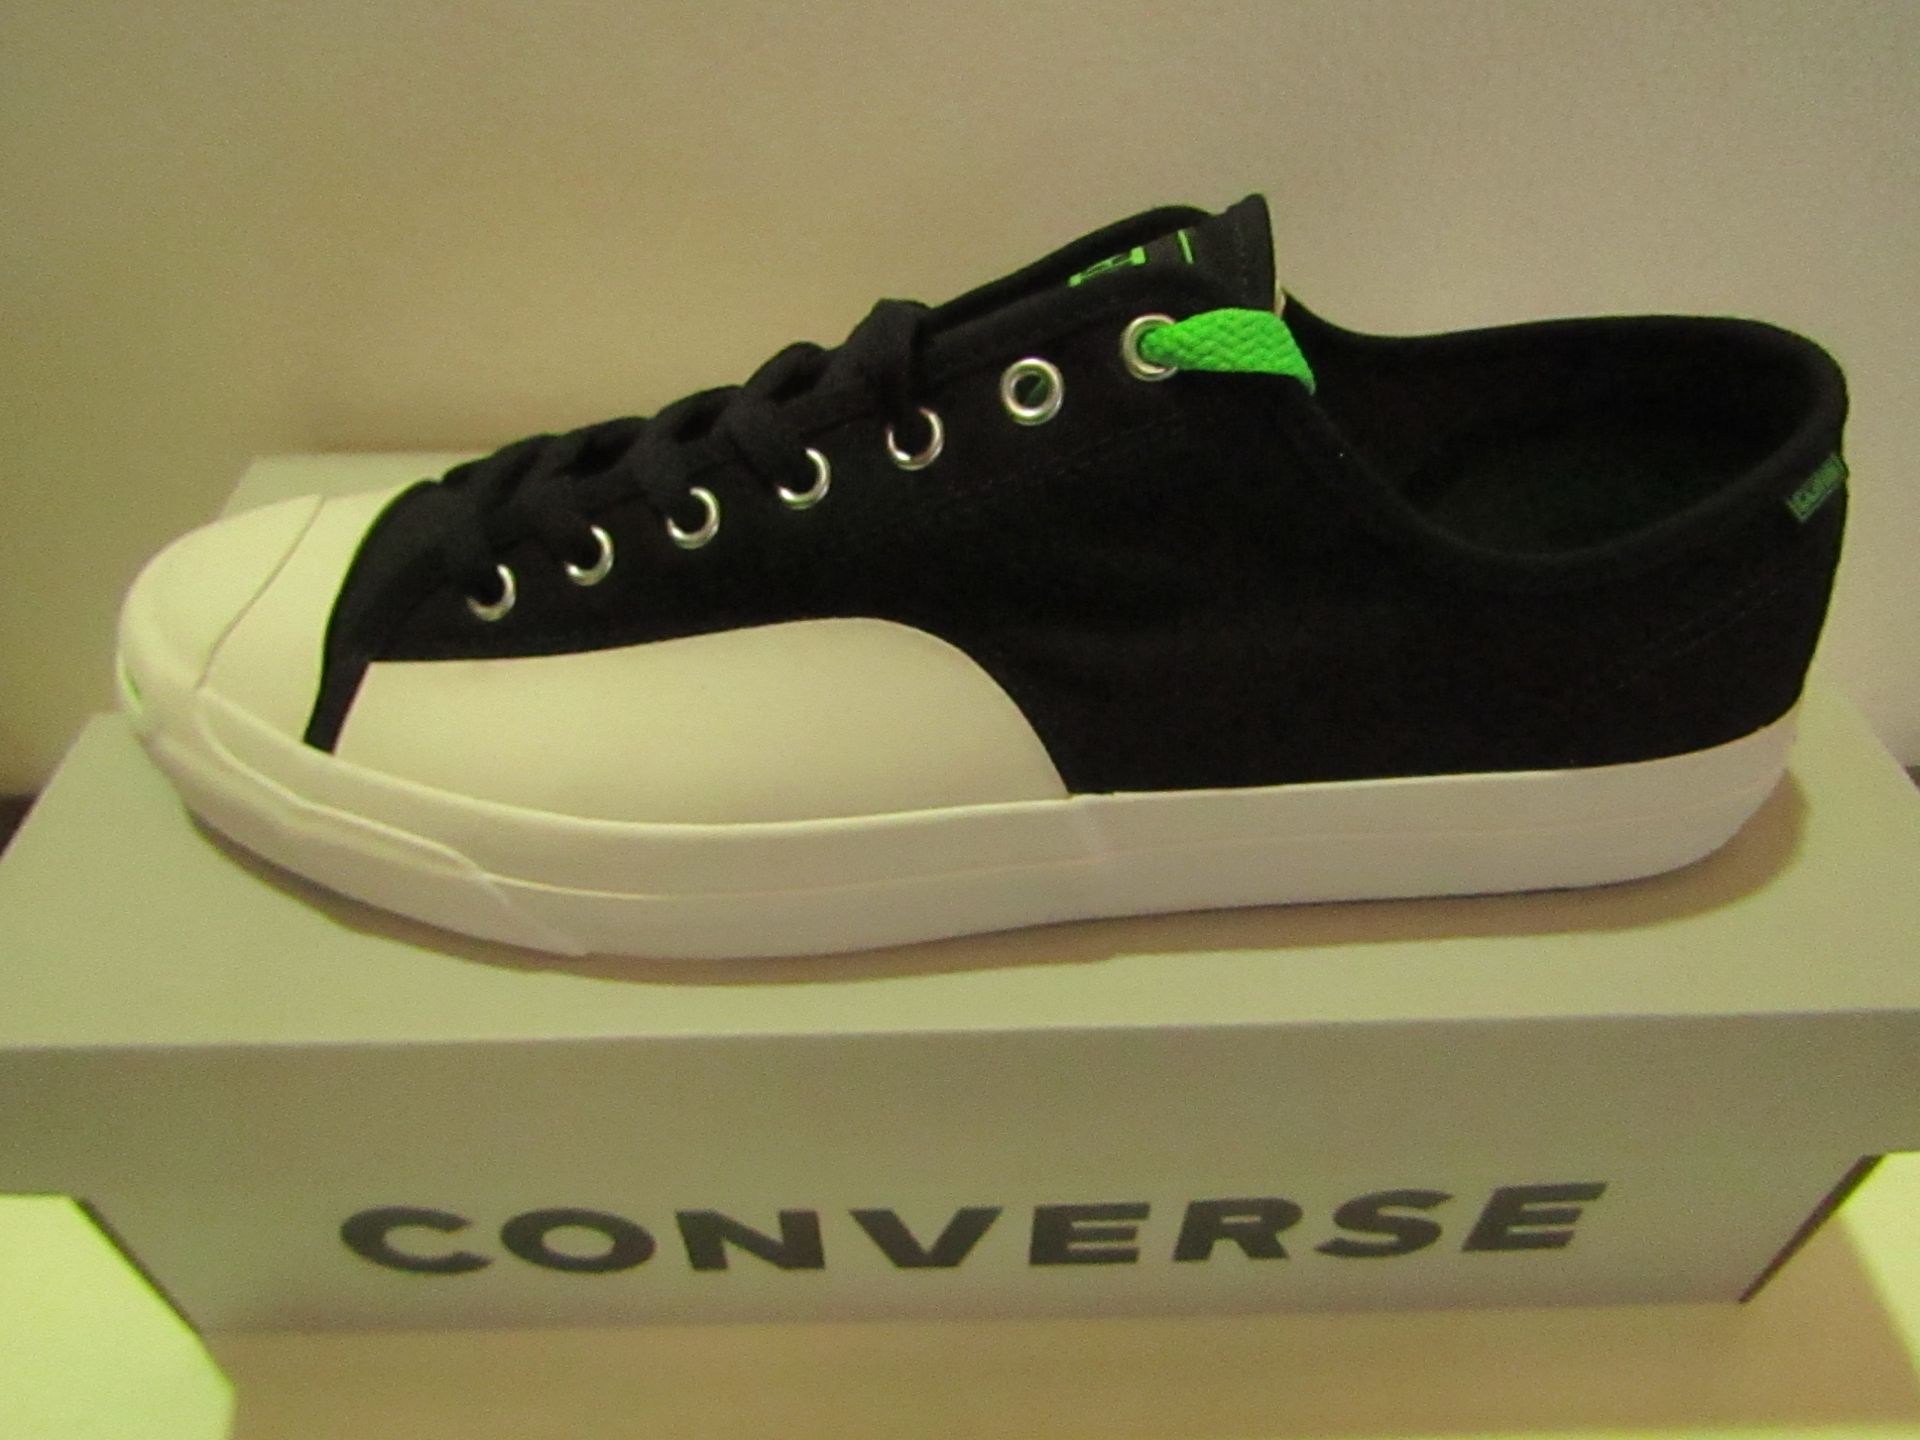 Converse Cons  Black/Acid Green Canvas Trainer size UK12 new & boxed see image for design